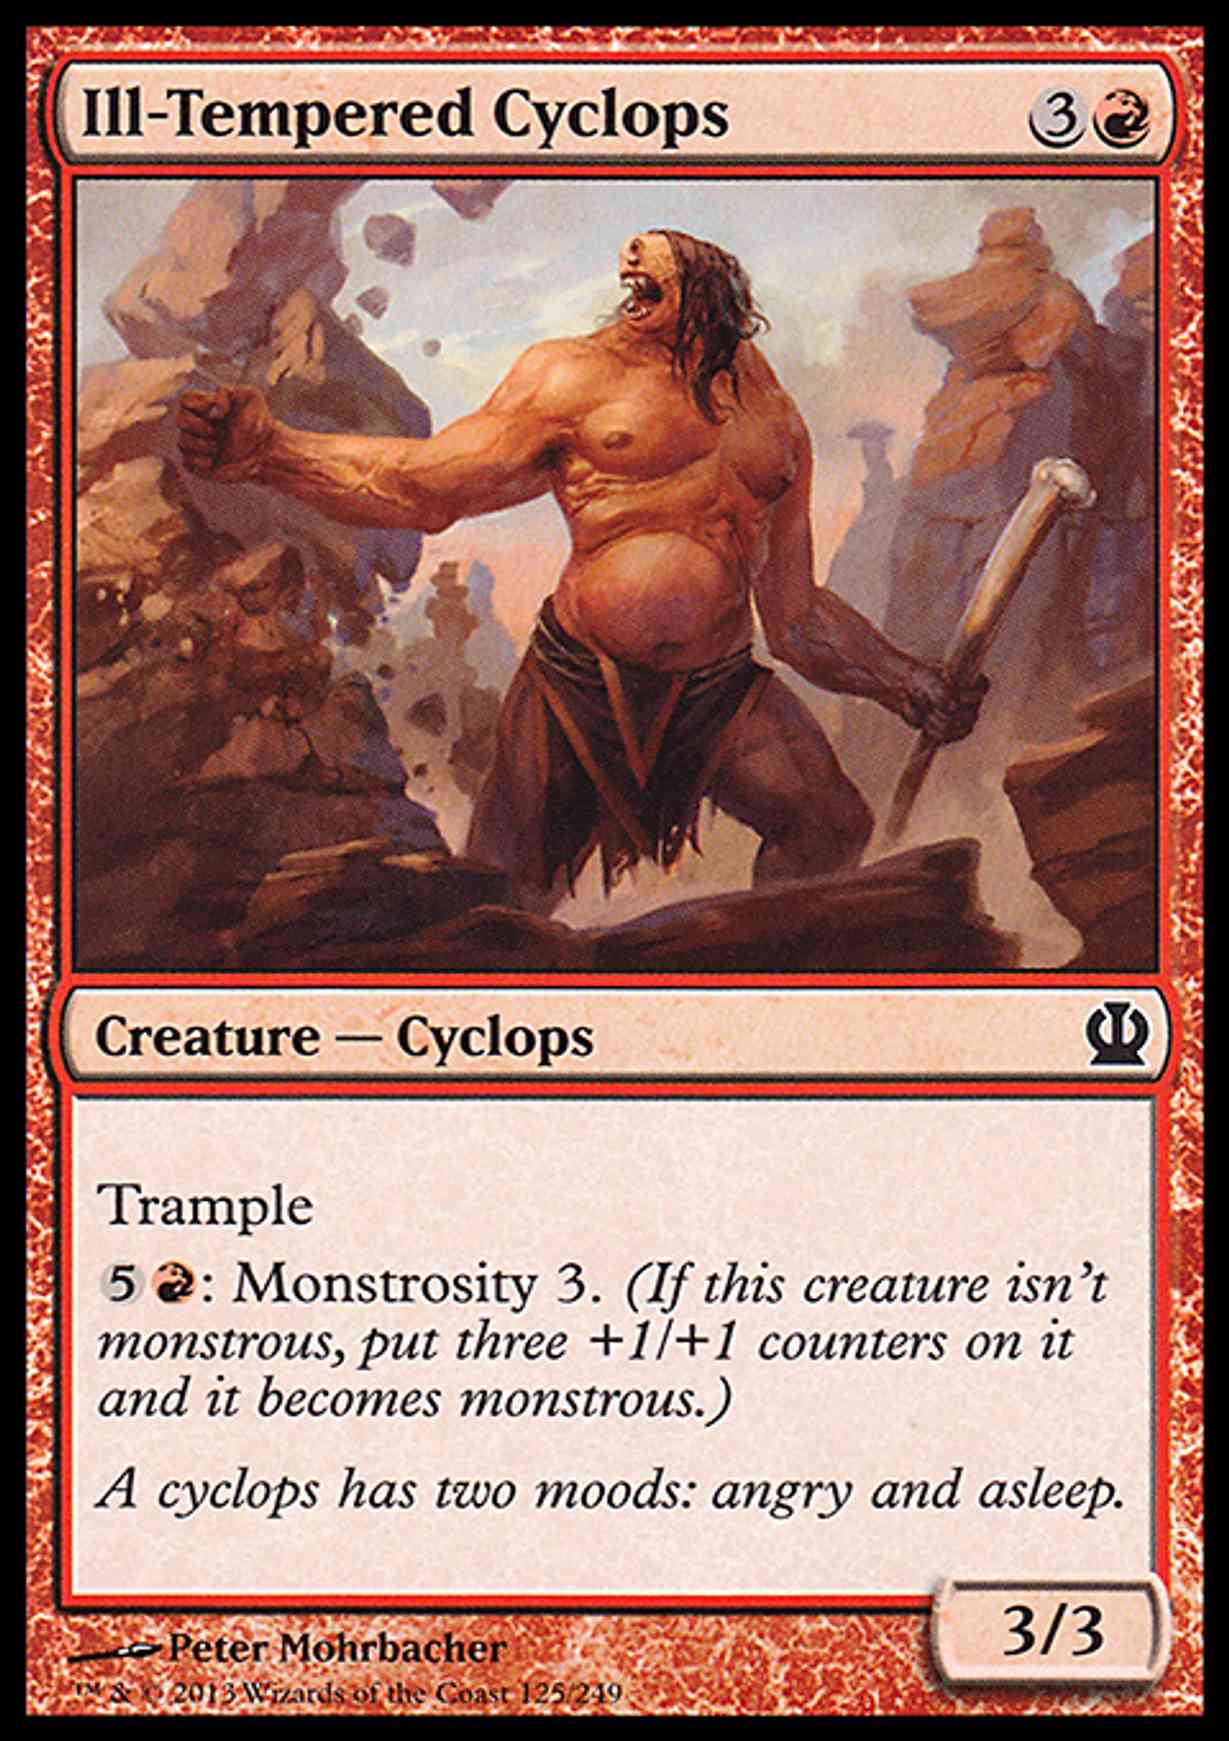 Ill-Tempered Cyclops magic card front